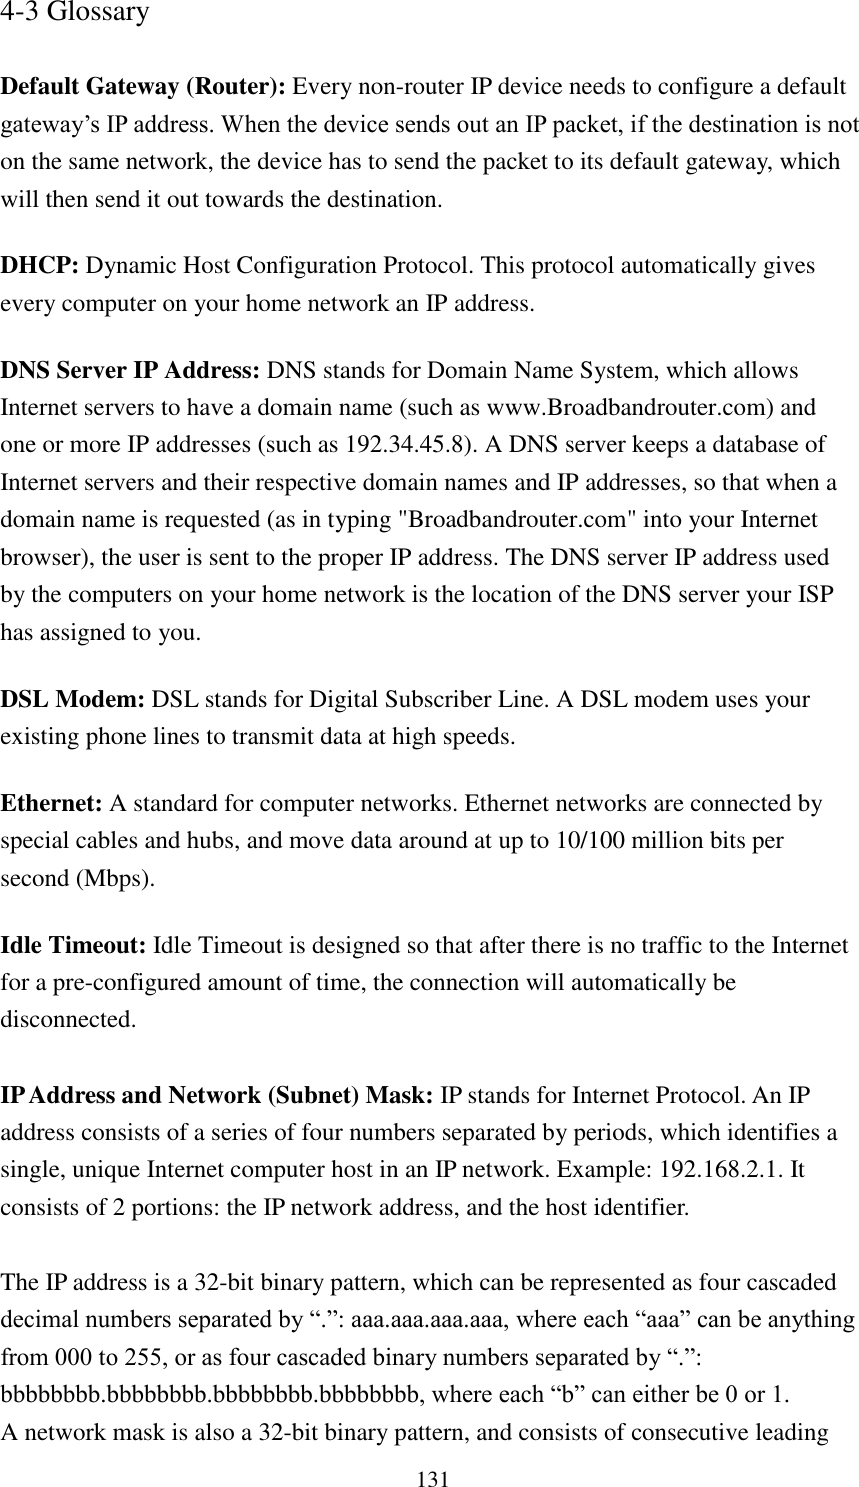 131 4-3 Glossary  Default Gateway (Router): Every non-router IP device needs to configure a default gateway‟s IP address. When the device sends out an IP packet, if the destination is not on the same network, the device has to send the packet to its default gateway, which will then send it out towards the destination. DHCP: Dynamic Host Configuration Protocol. This protocol automatically gives every computer on your home network an IP address. DNS Server IP Address: DNS stands for Domain Name System, which allows Internet servers to have a domain name (such as www.Broadbandrouter.com) and one or more IP addresses (such as 192.34.45.8). A DNS server keeps a database of Internet servers and their respective domain names and IP addresses, so that when a domain name is requested (as in typing &quot;Broadbandrouter.com&quot; into your Internet browser), the user is sent to the proper IP address. The DNS server IP address used by the computers on your home network is the location of the DNS server your ISP has assigned to you.   DSL Modem: DSL stands for Digital Subscriber Line. A DSL modem uses your existing phone lines to transmit data at high speeds.   Ethernet: A standard for computer networks. Ethernet networks are connected by special cables and hubs, and move data around at up to 10/100 million bits per second (Mbps).   Idle Timeout: Idle Timeout is designed so that after there is no traffic to the Internet for a pre-configured amount of time, the connection will automatically be disconnected.  IP Address and Network (Subnet) Mask: IP stands for Internet Protocol. An IP address consists of a series of four numbers separated by periods, which identifies a single, unique Internet computer host in an IP network. Example: 192.168.2.1. It consists of 2 portions: the IP network address, and the host identifier.  The IP address is a 32-bit binary pattern, which can be represented as four cascaded decimal numbers separated by “.”: aaa.aaa.aaa.aaa, where each “aaa” can be anything from 000 to 255, or as four cascaded binary numbers separated by “.”: bbbbbbbb.bbbbbbbb.bbbbbbbb.bbbbbbbb, where each “b” can either be 0 or 1. A network mask is also a 32-bit binary pattern, and consists of consecutive leading 